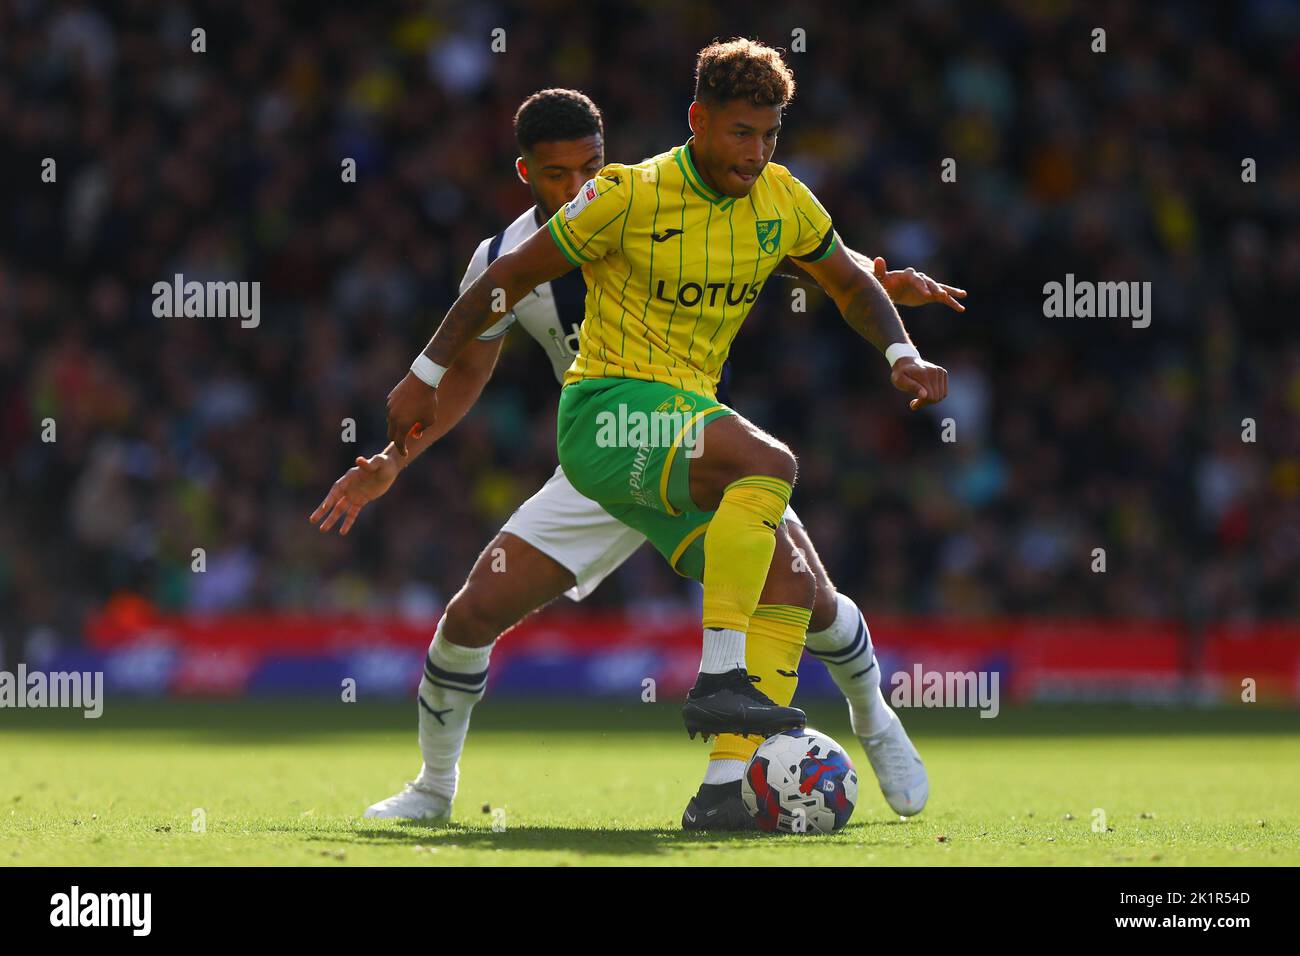 Onel Hernandez of Norwich City and Darnell Furlong of West Bromwich Albion - Norwich City v West Bromwich Albion, Sky Bet Championship, Carrow Road, Norwich, UK - 17th September 2022  Editorial Use Only - DataCo restrictions apply Stock Photo